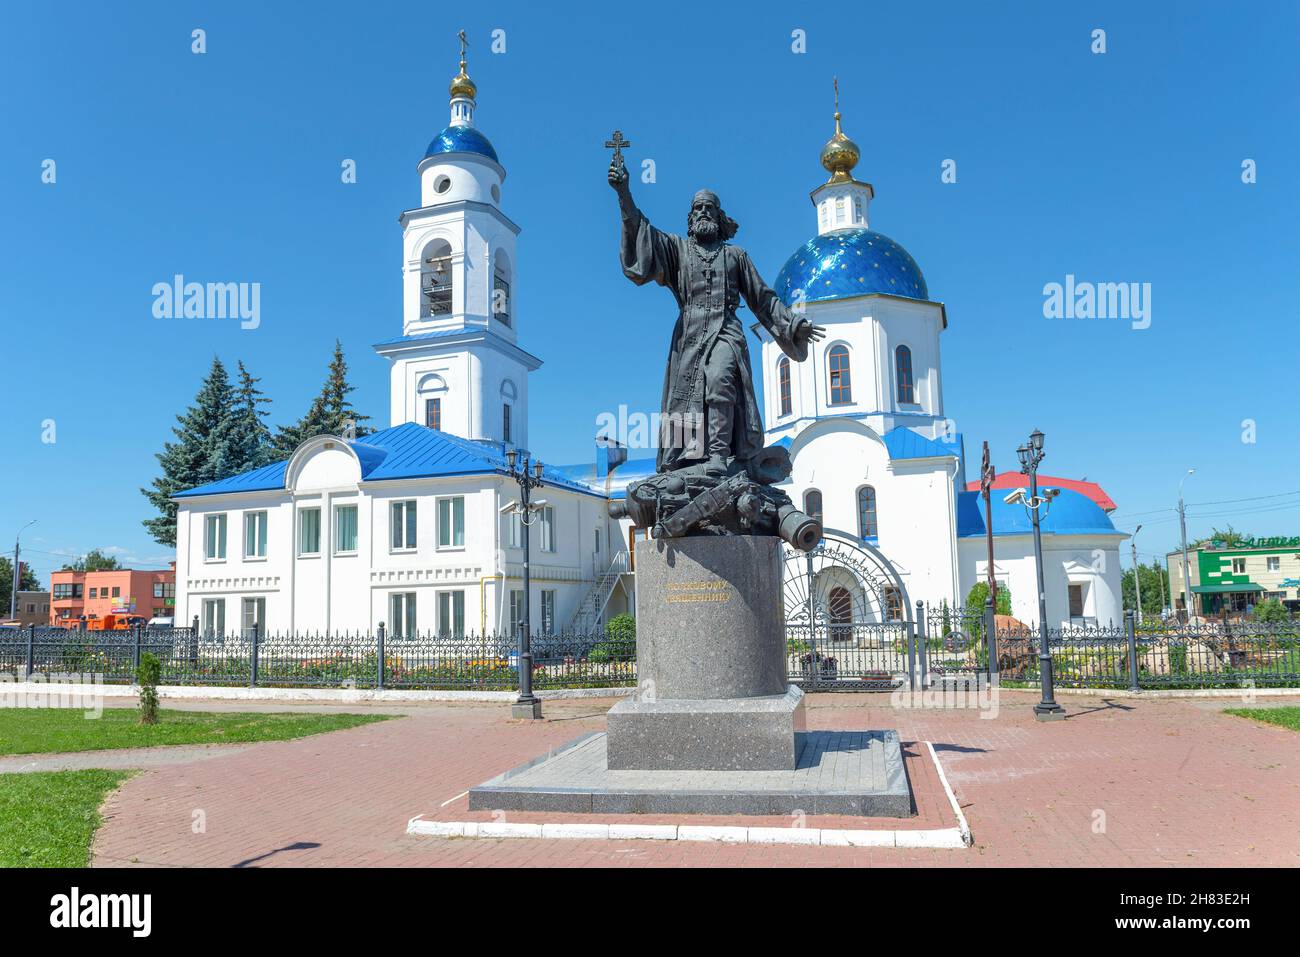 MALOYAROSLAVETS, RUSSIA - JULY 07, 2021: Monument to the regimental priest against the background of the ancient Kazan Cathedral on a sunny July day Stock Photo